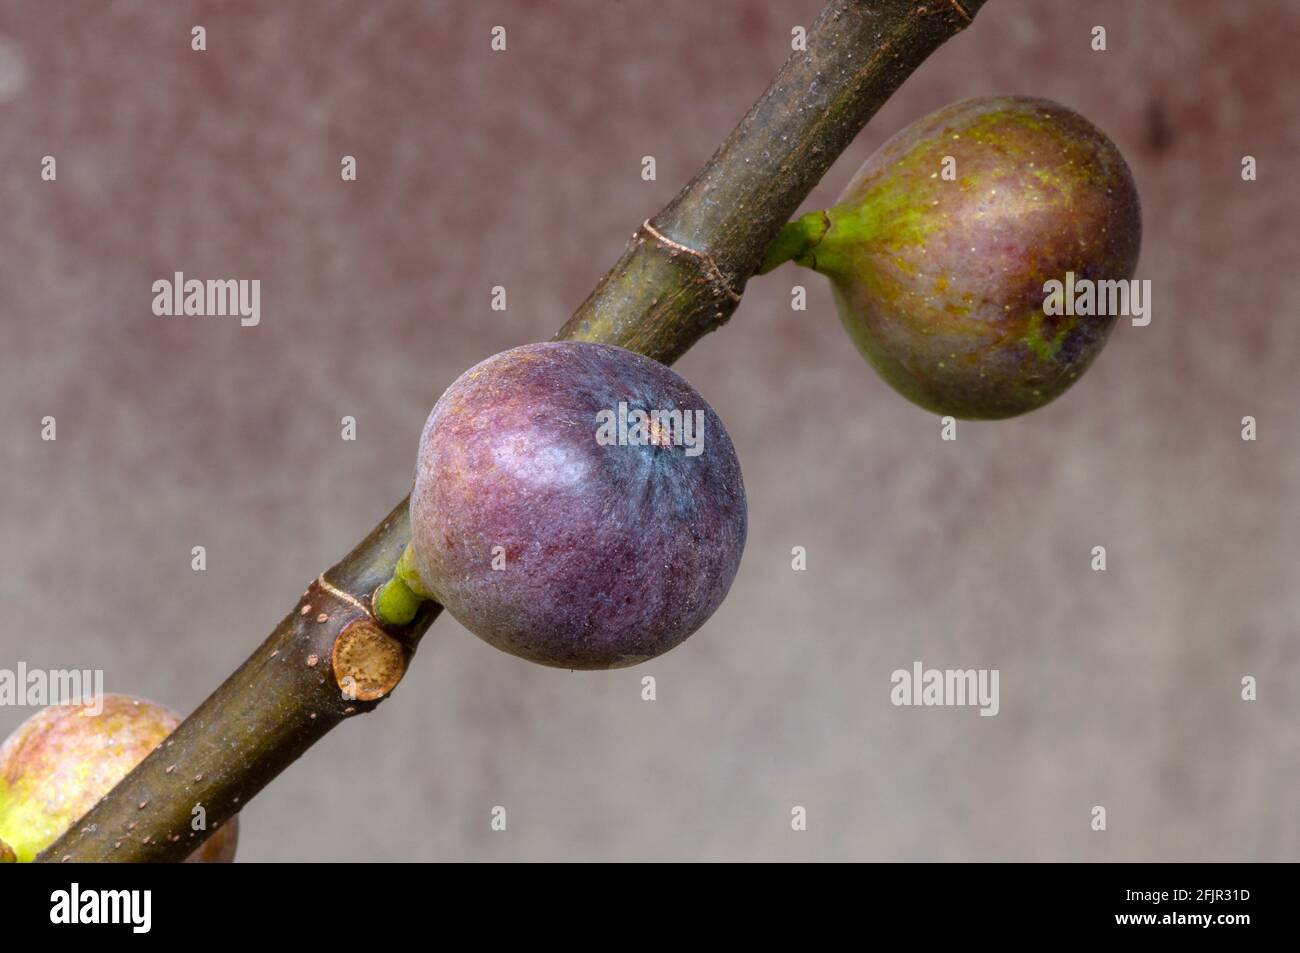 Close up of ripe Tin fruits, Fig fruits, in shallow focus. The Scientific name of this fruits is Ficus carica, a species of flowering plant in the mul Stock Photo